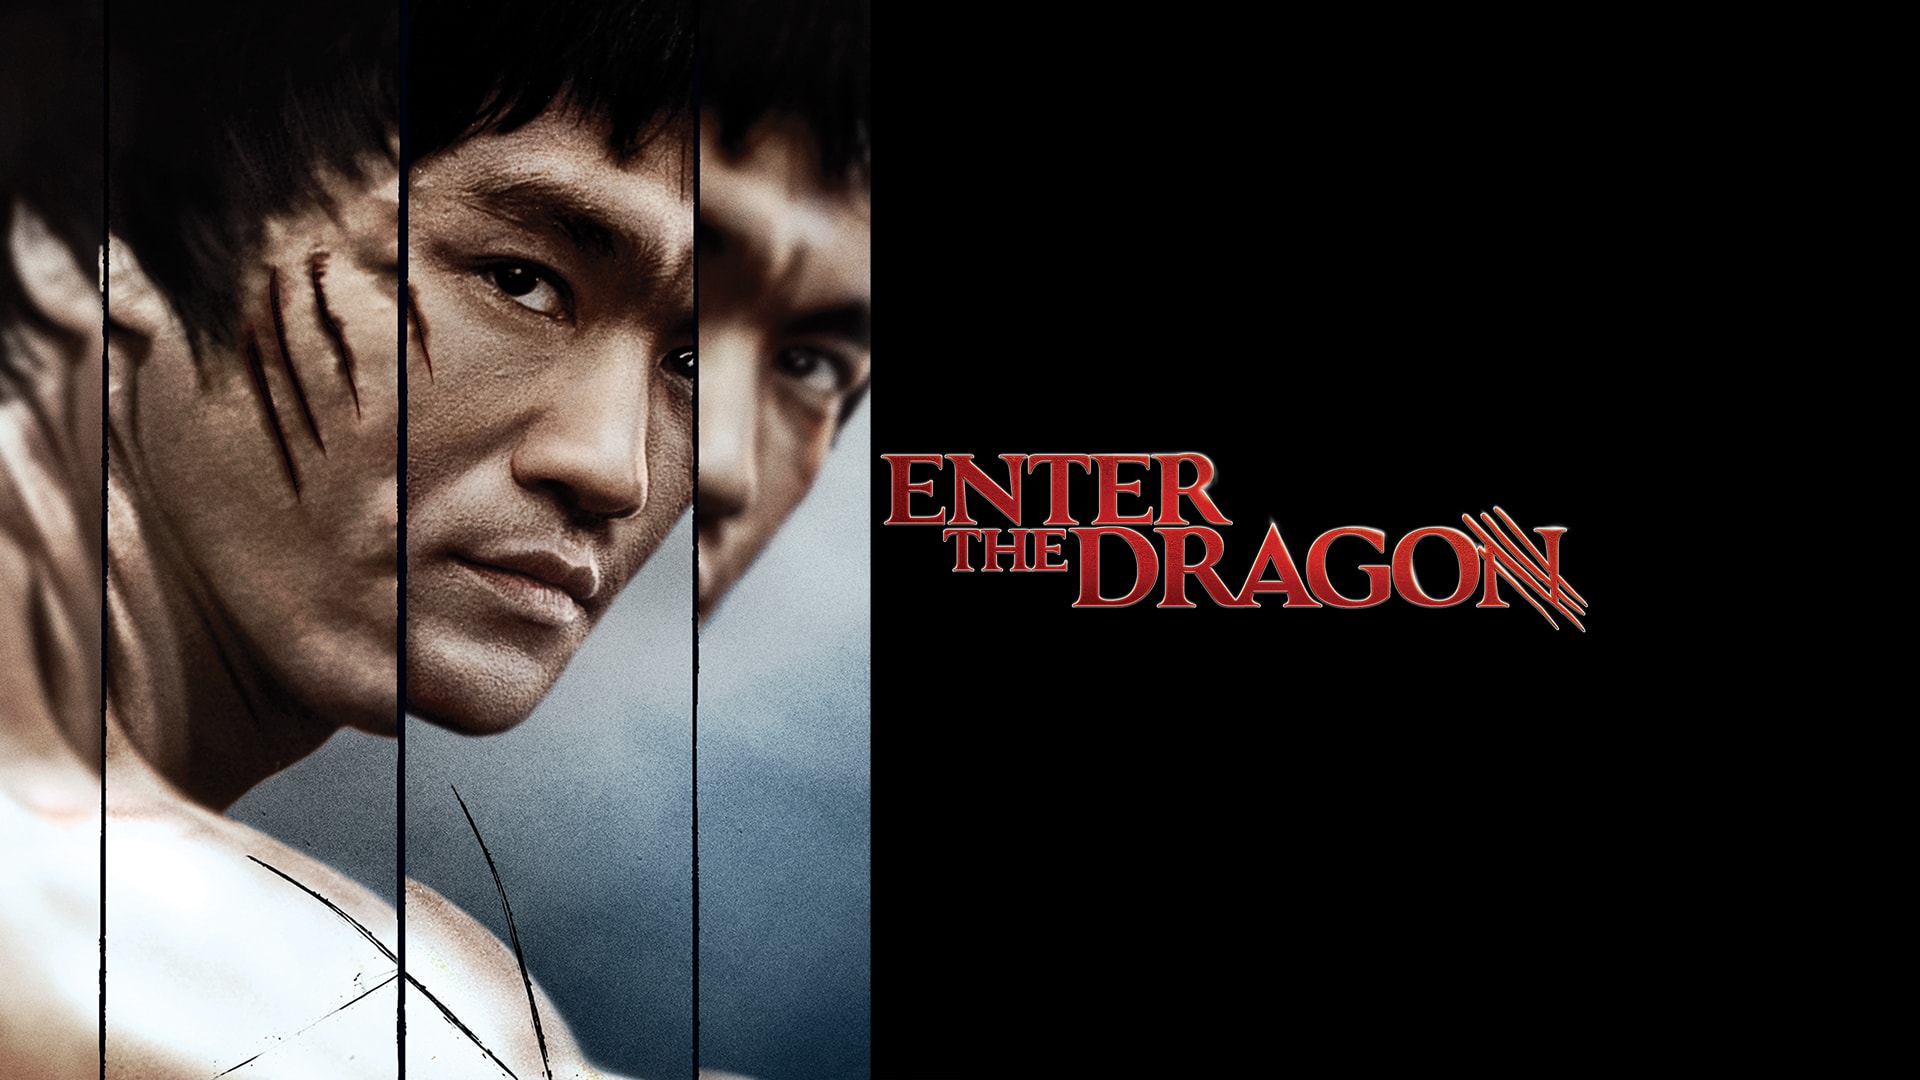 Watch Enter the Dragon Online | Stream Full Movies